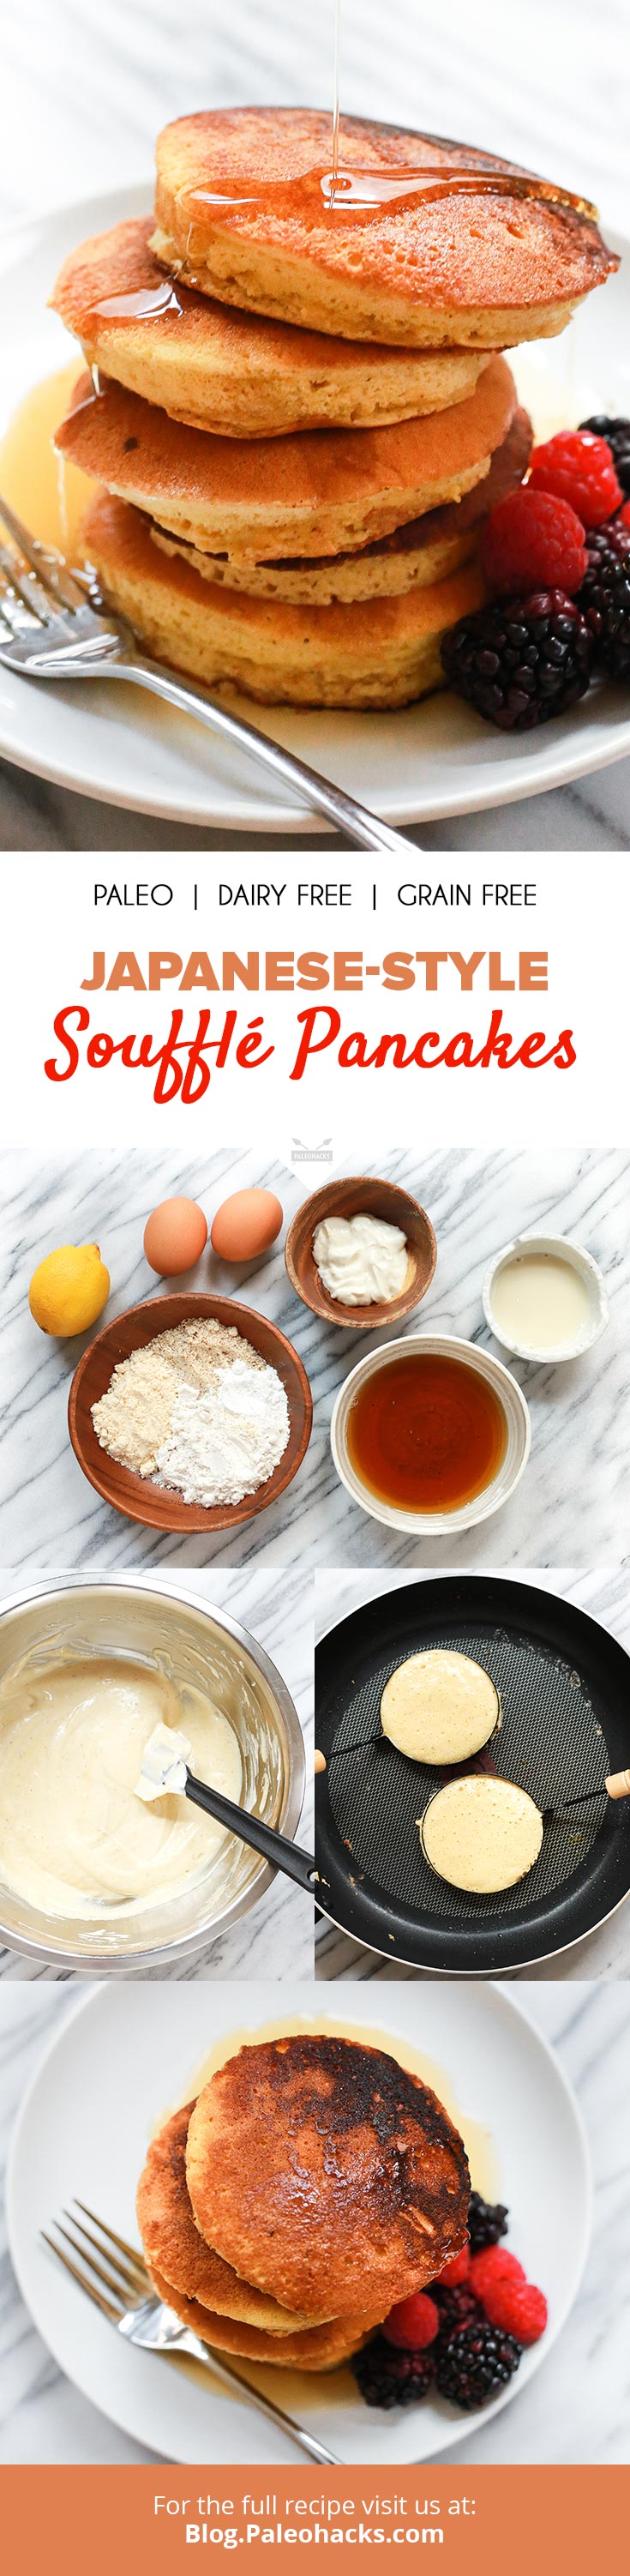 Today’s recipe makes a batch of thick and beautifully airy pancakes inspired by Japanese soufflé pancakes. This Paleo version is dairy-free and grain-free.